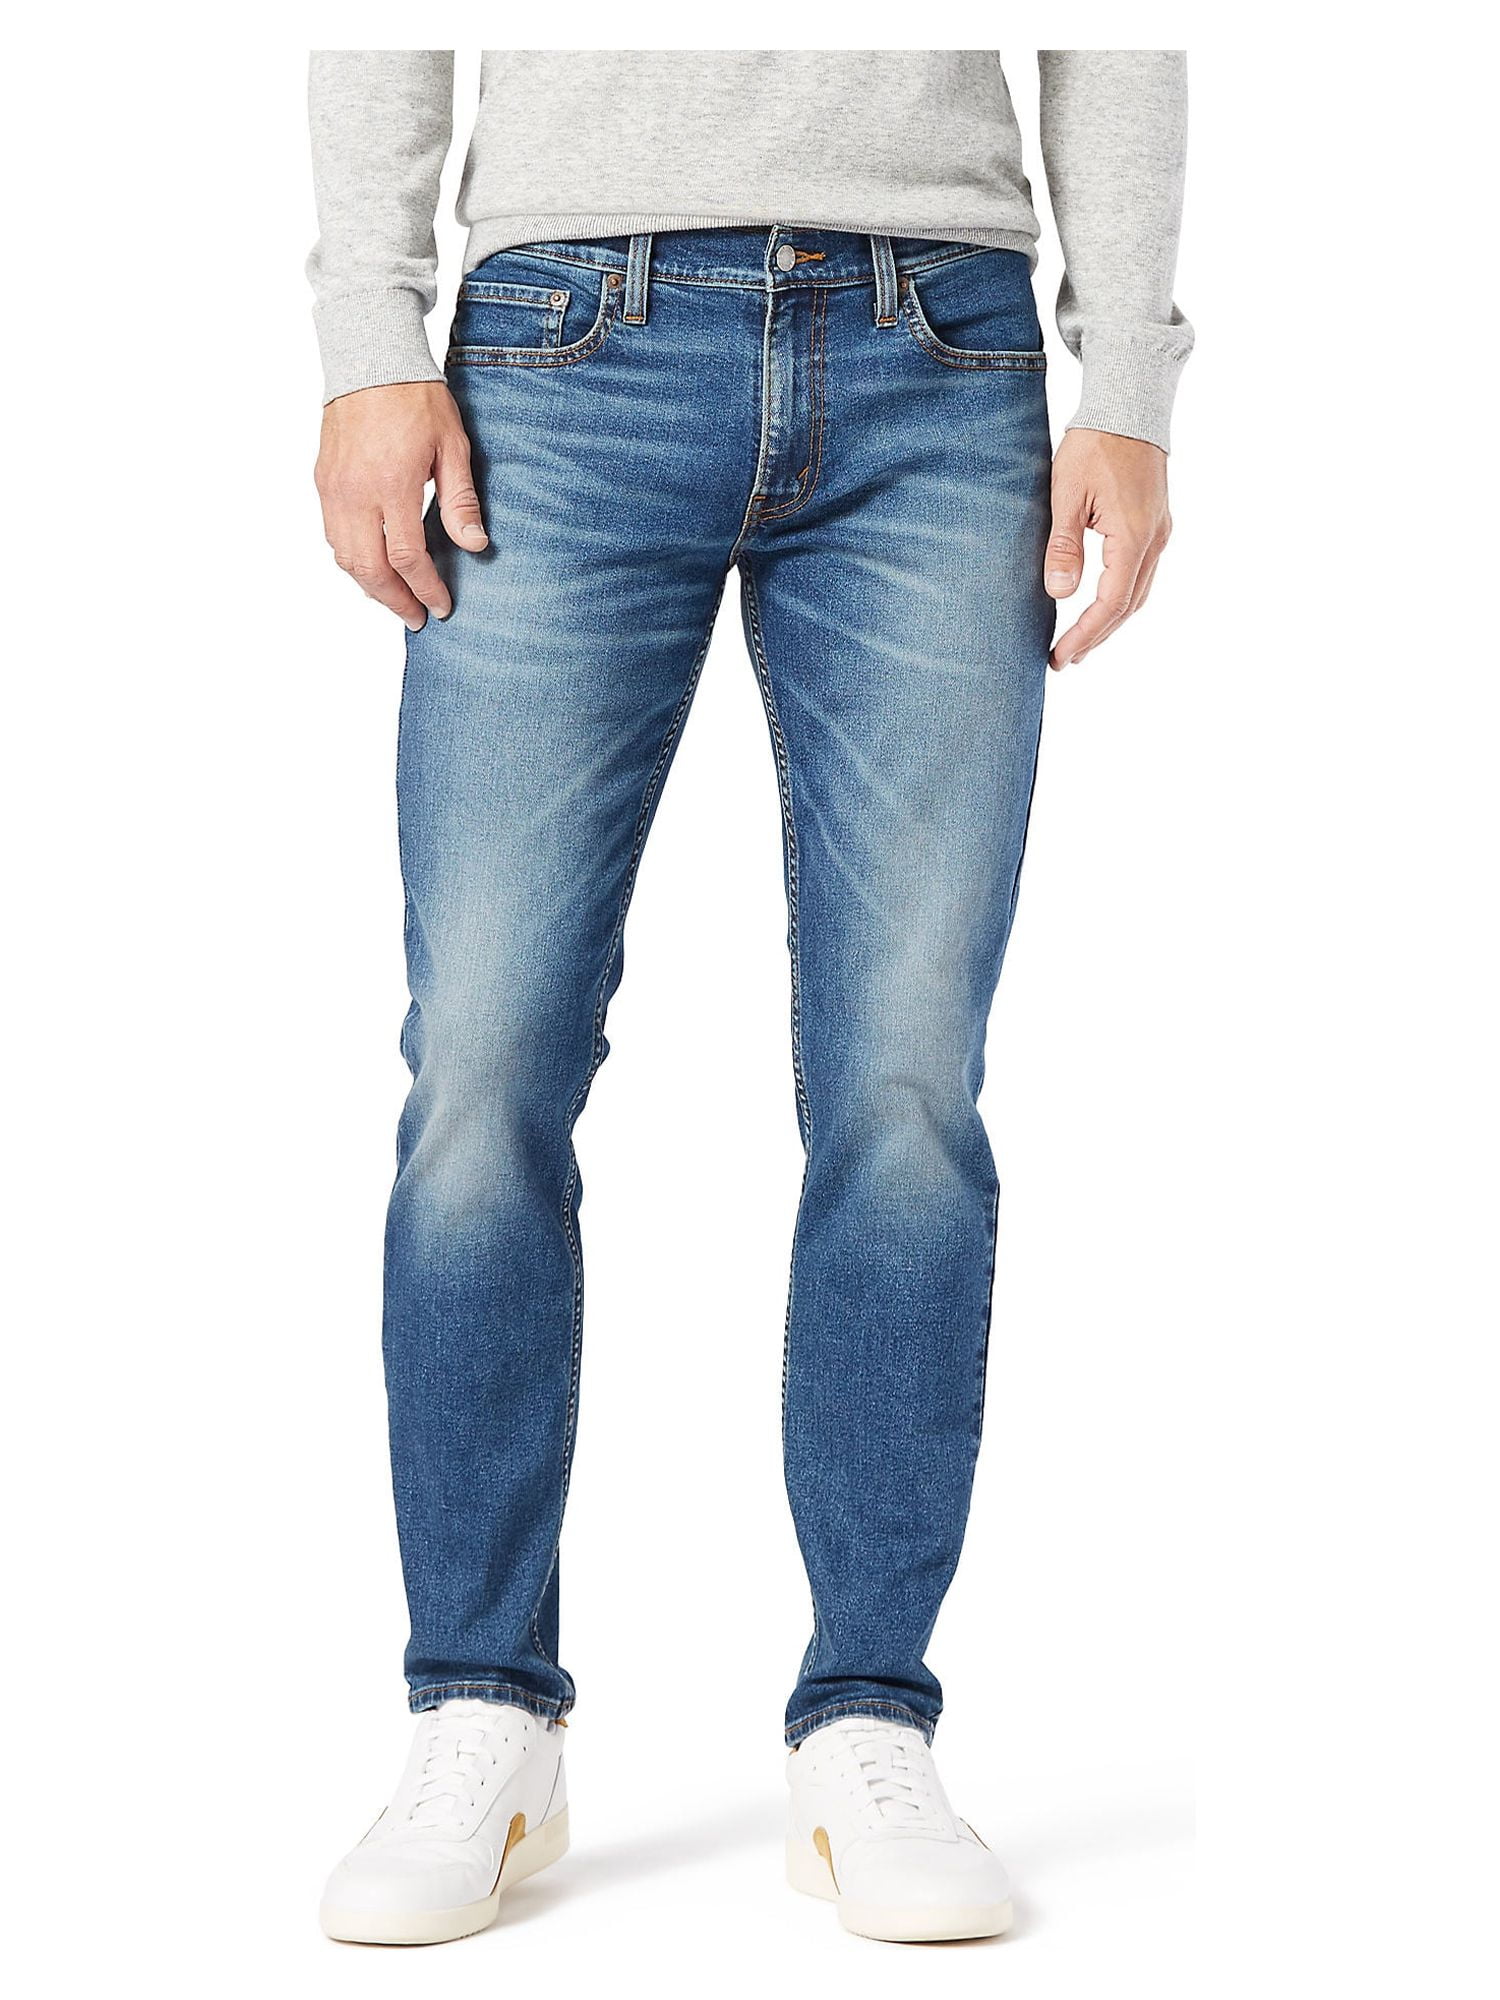 Signature by Levi Strauss & Co. Men's Straight Fit Jeans 